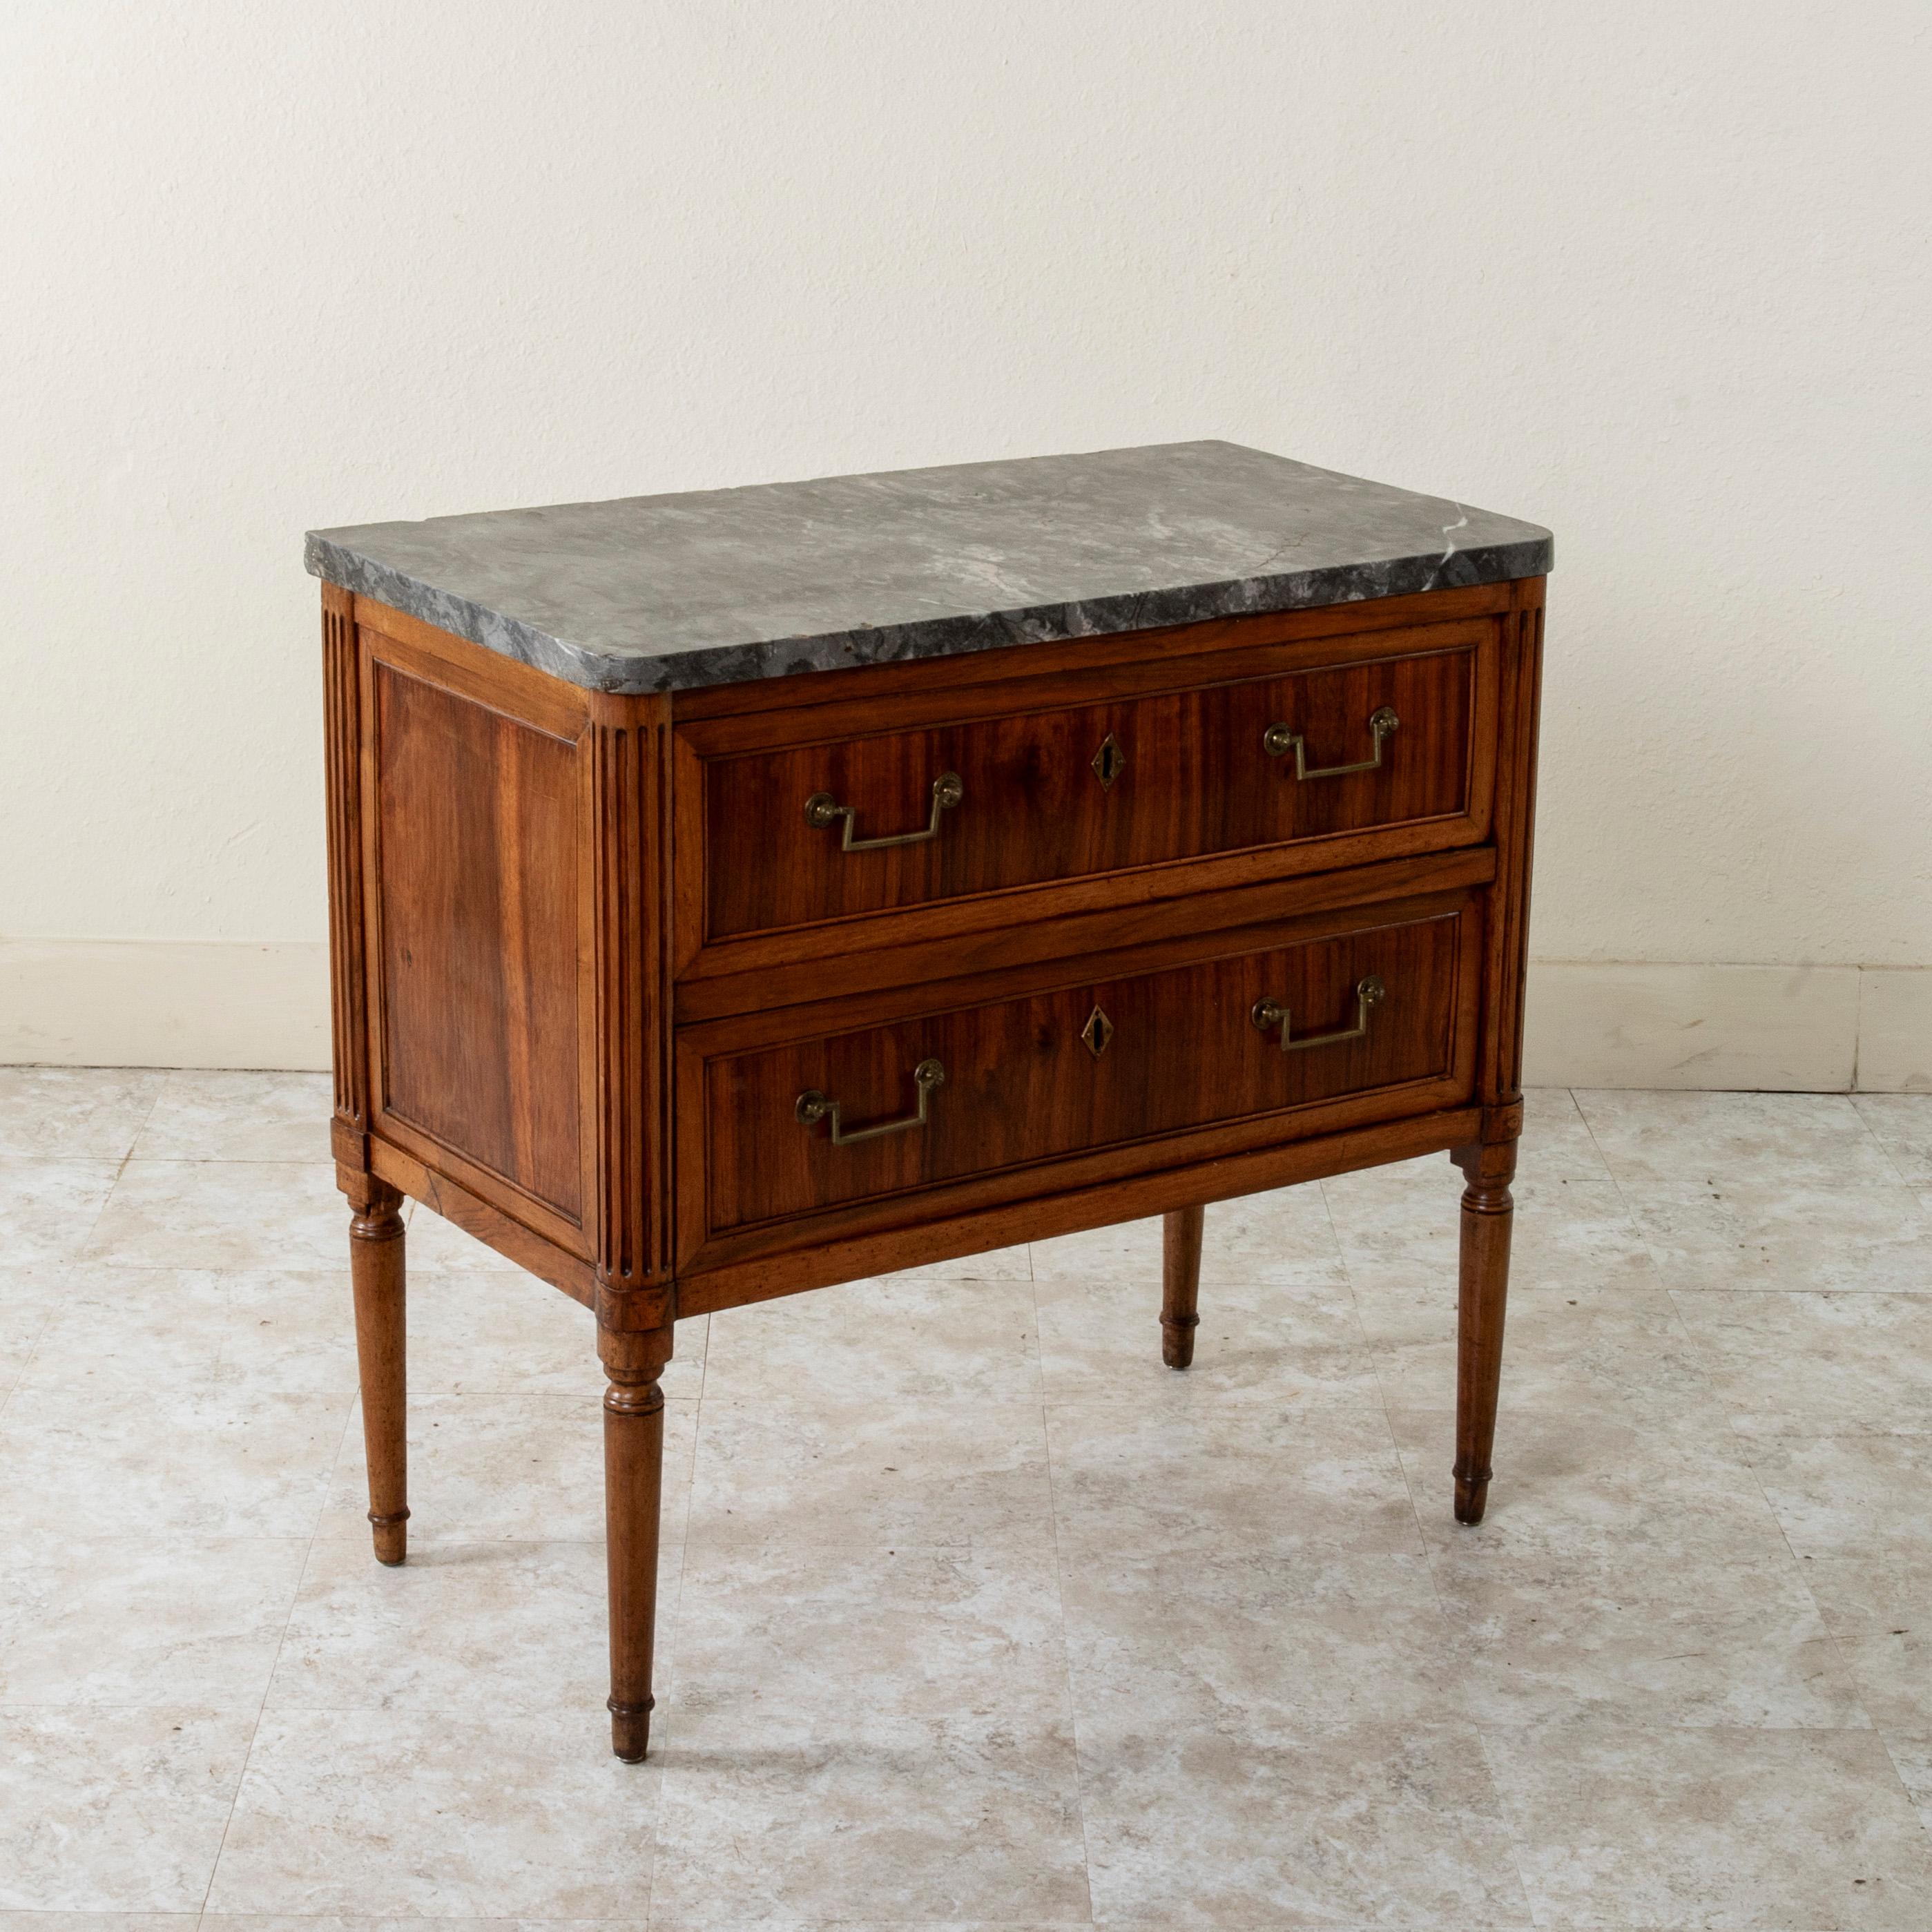 Small Scale Late 18th Century French Louis XVI Period Walnut Chest, Marble Top In Good Condition For Sale In Fayetteville, AR